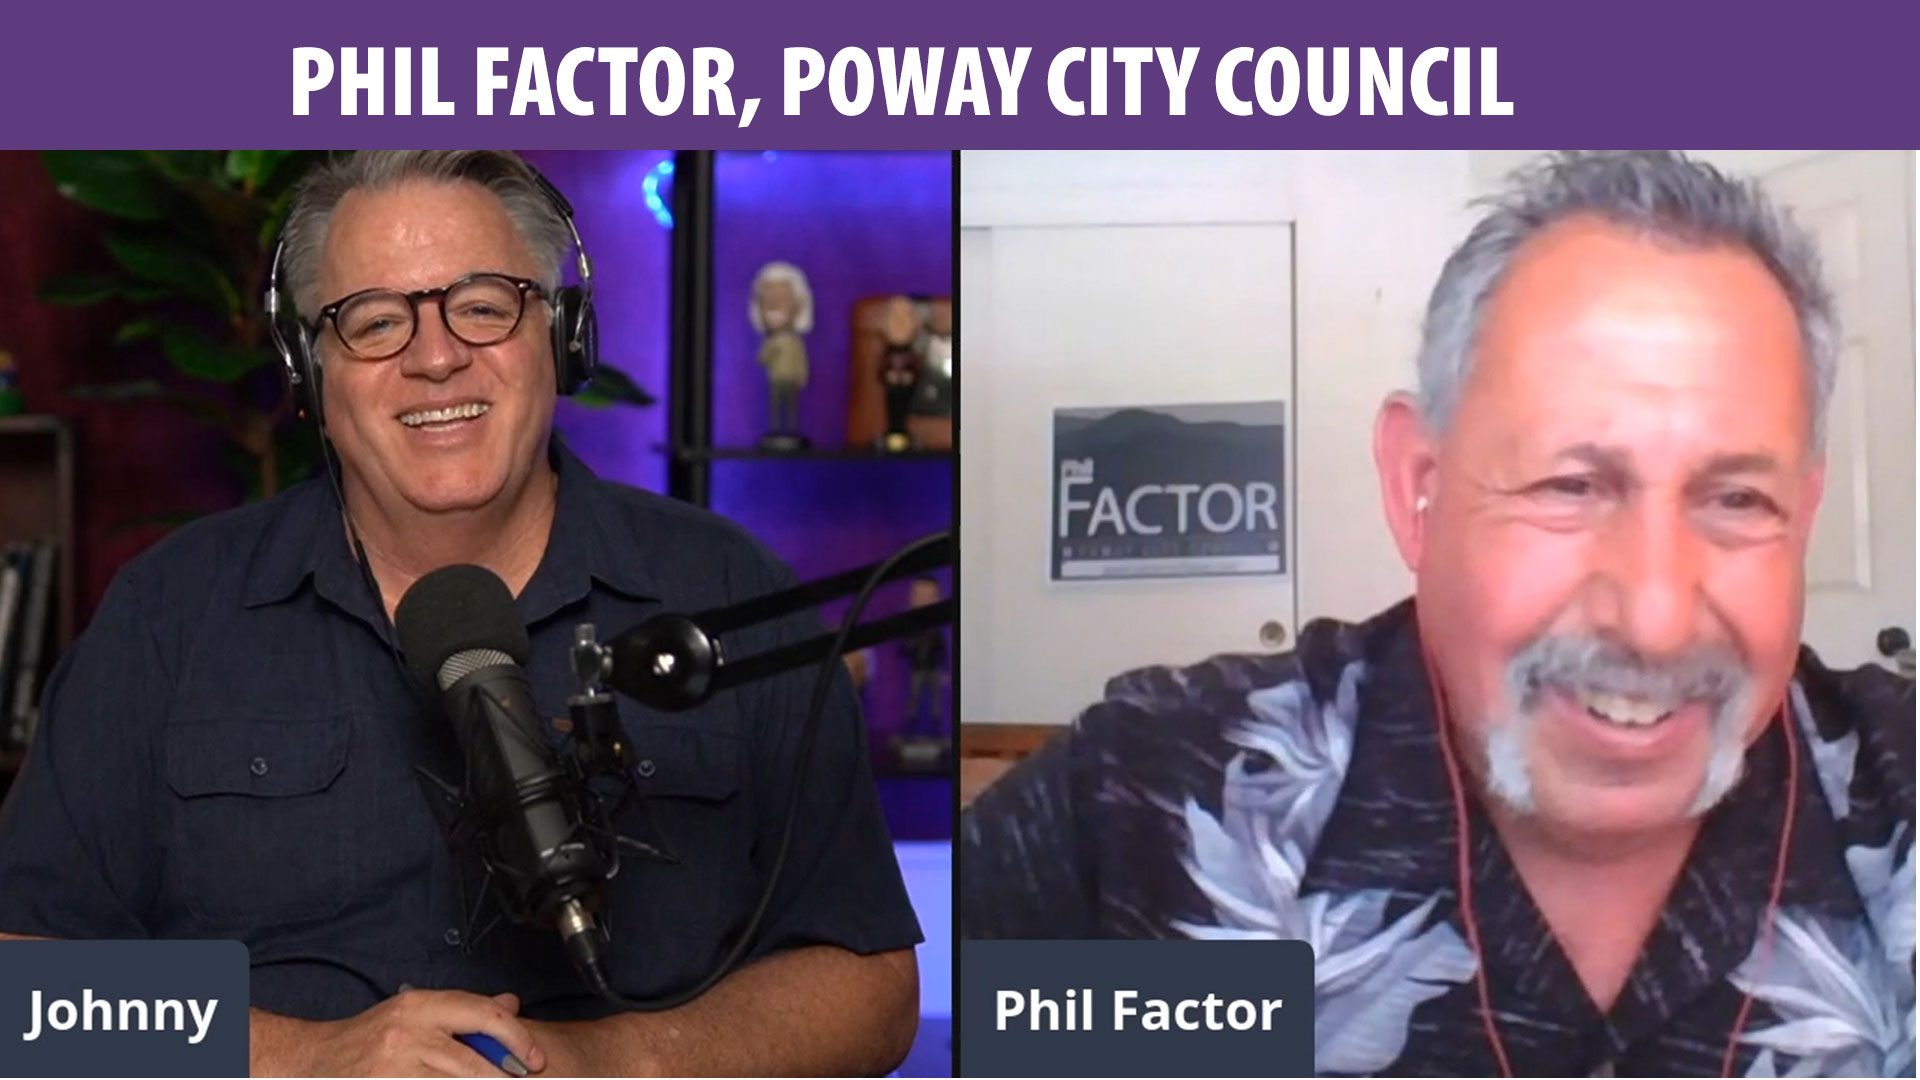 Phil Factor, Poway City Council, John Riley Project, RP0158